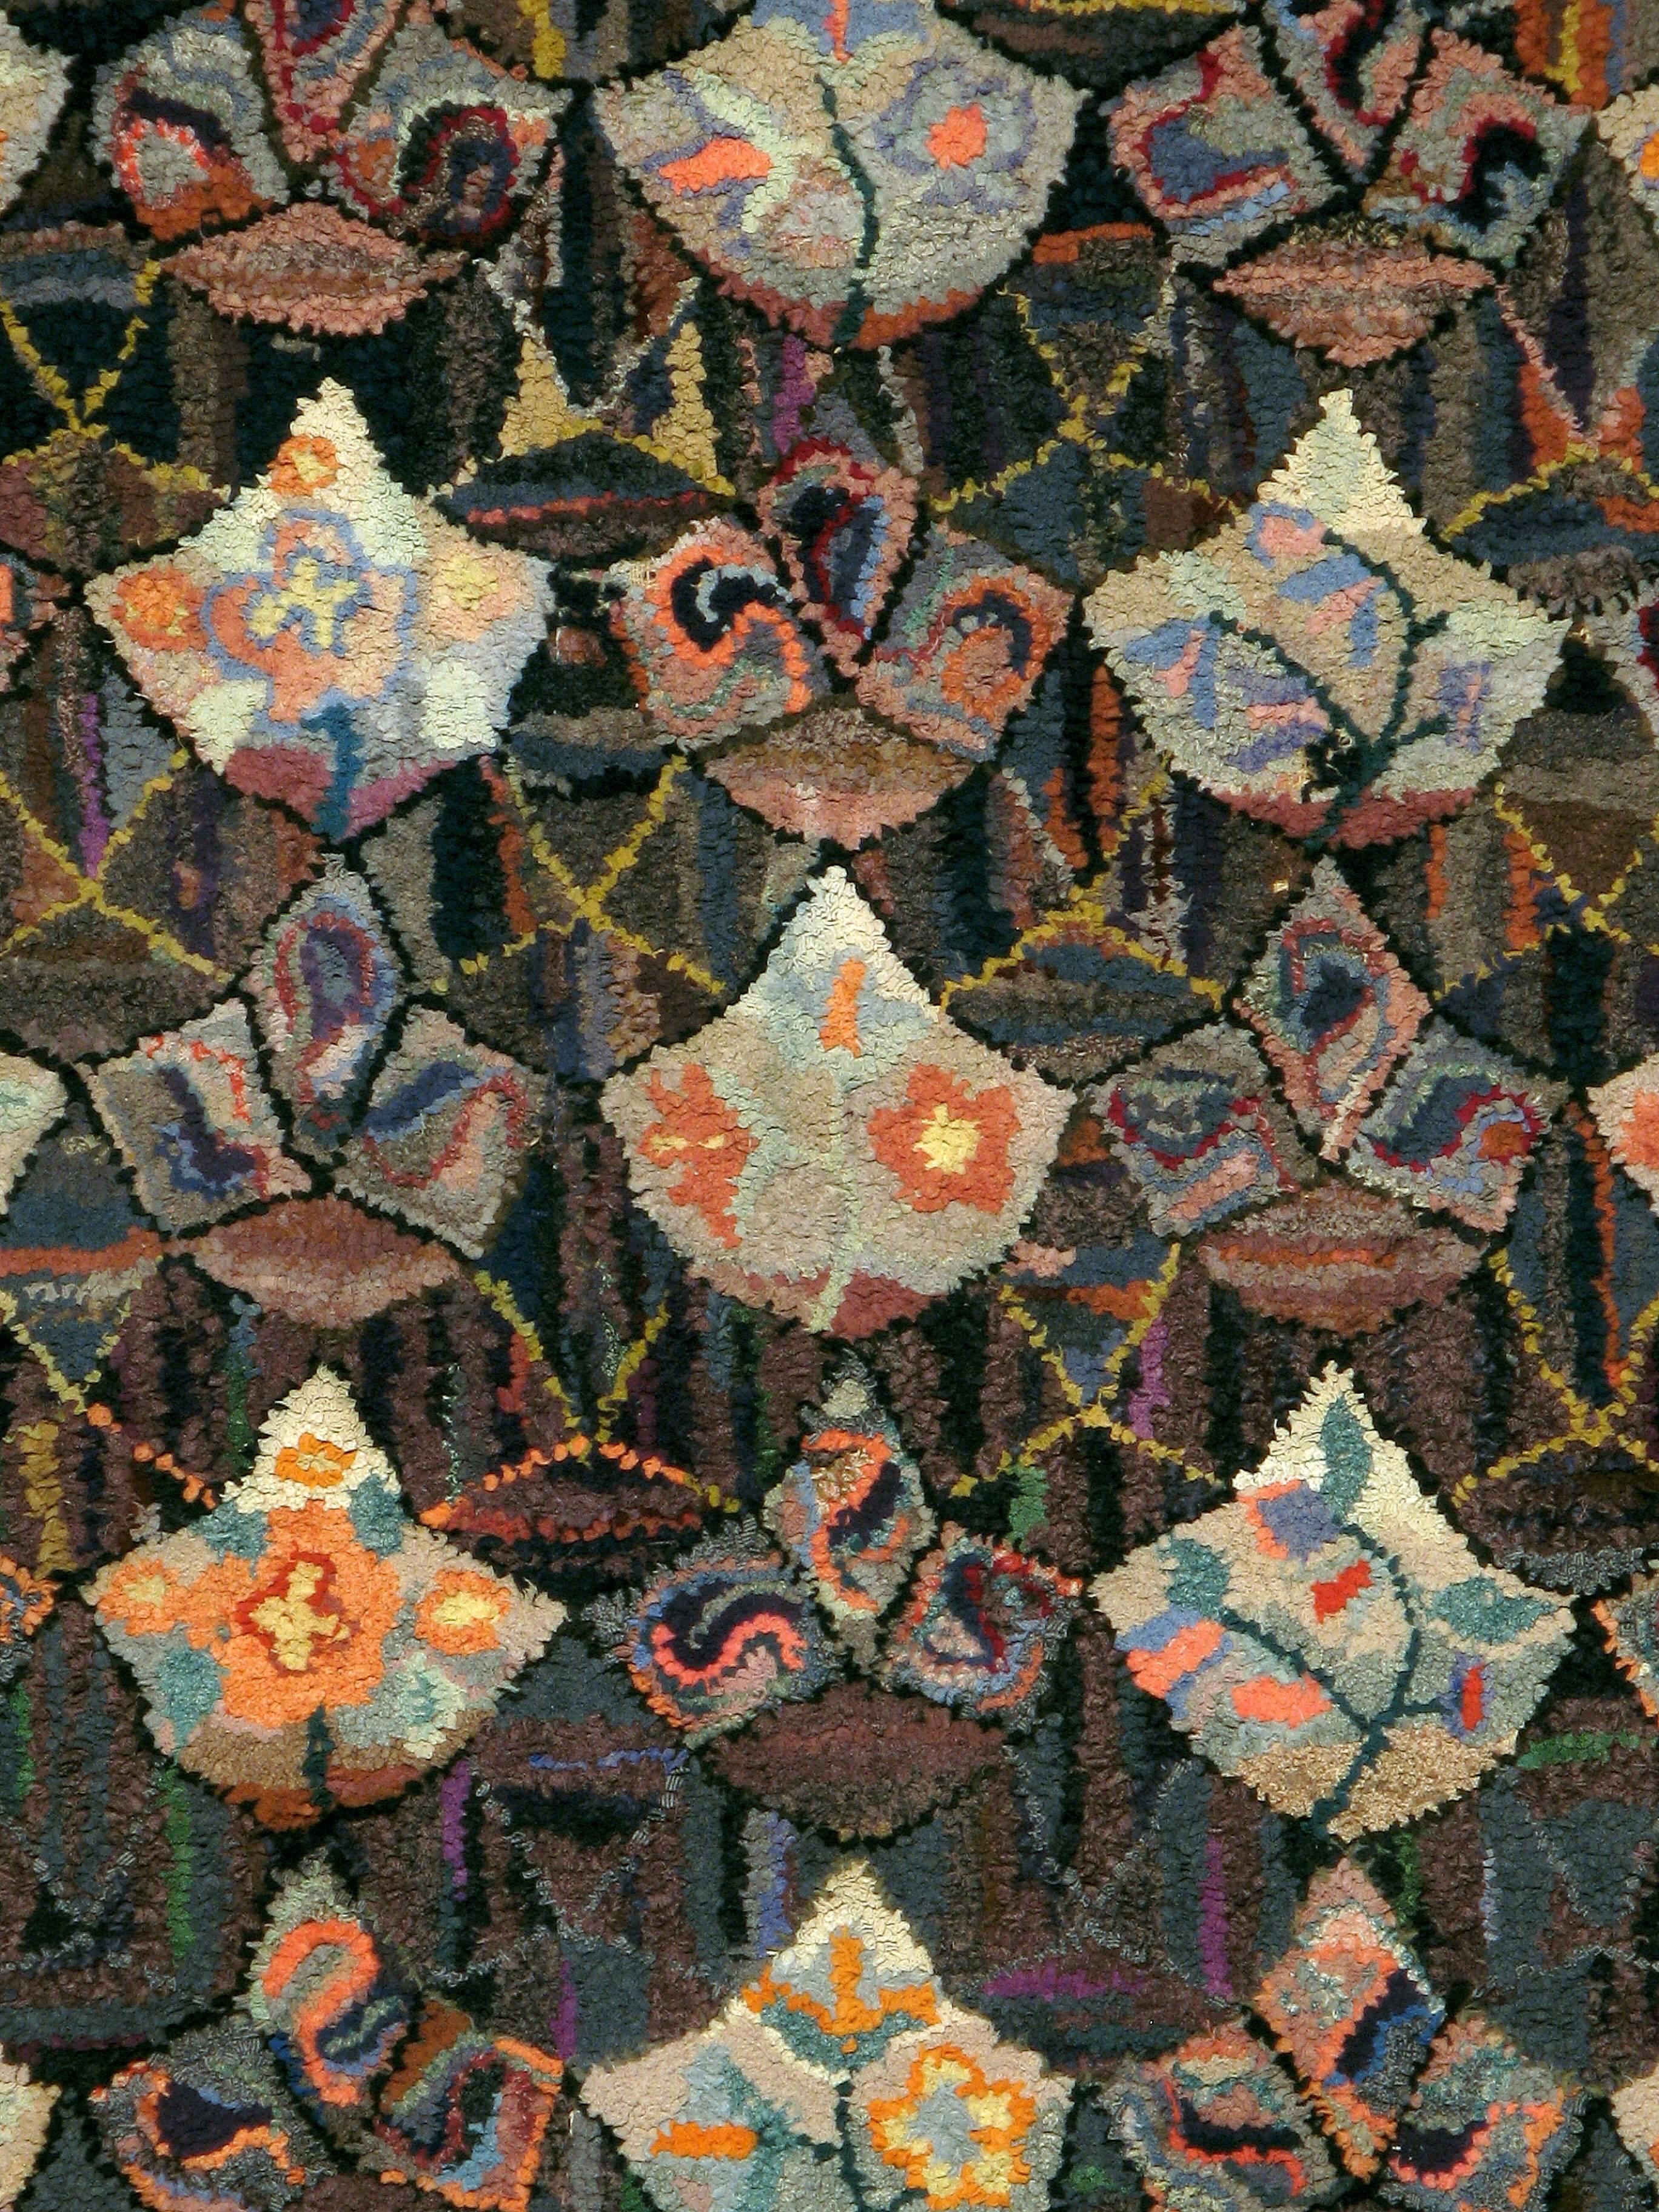 A vintage American Hook carpet from the mid-20th century.